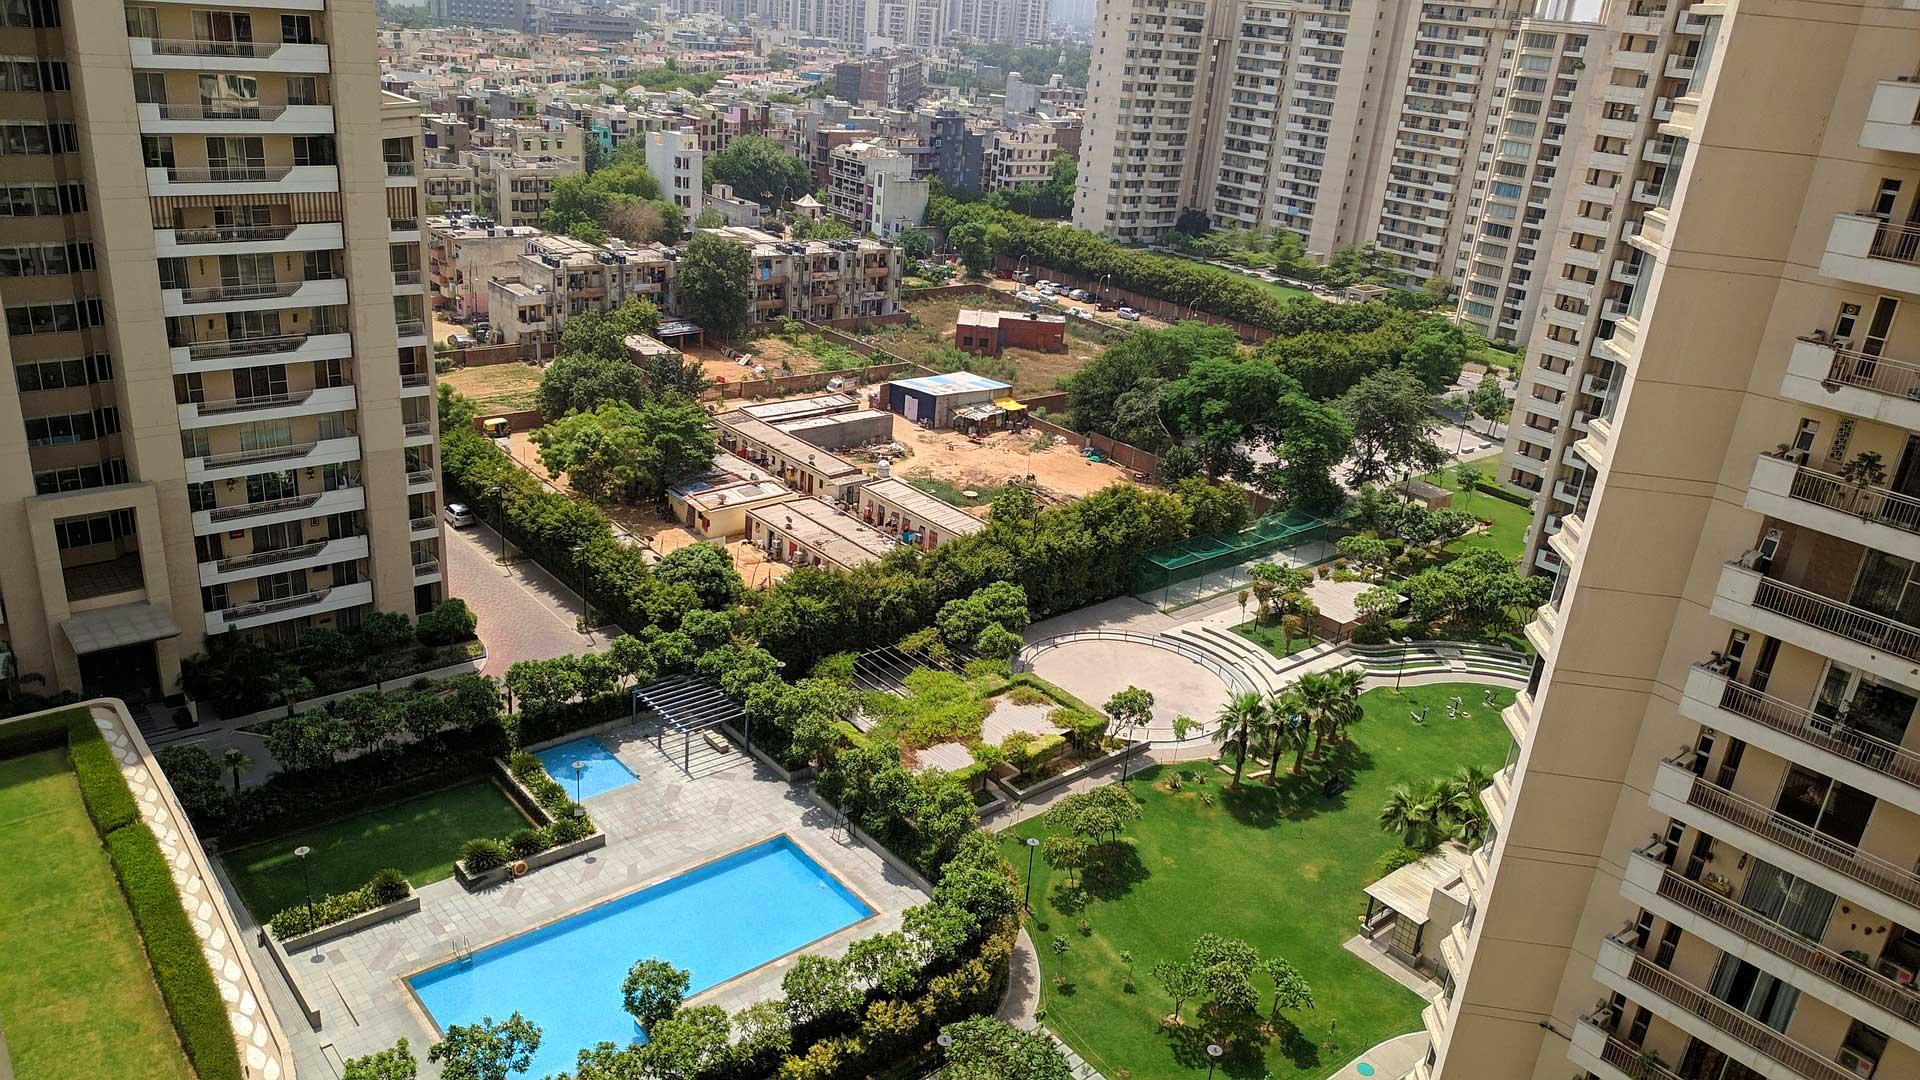 Residential area in Gurgaon with swimming pool